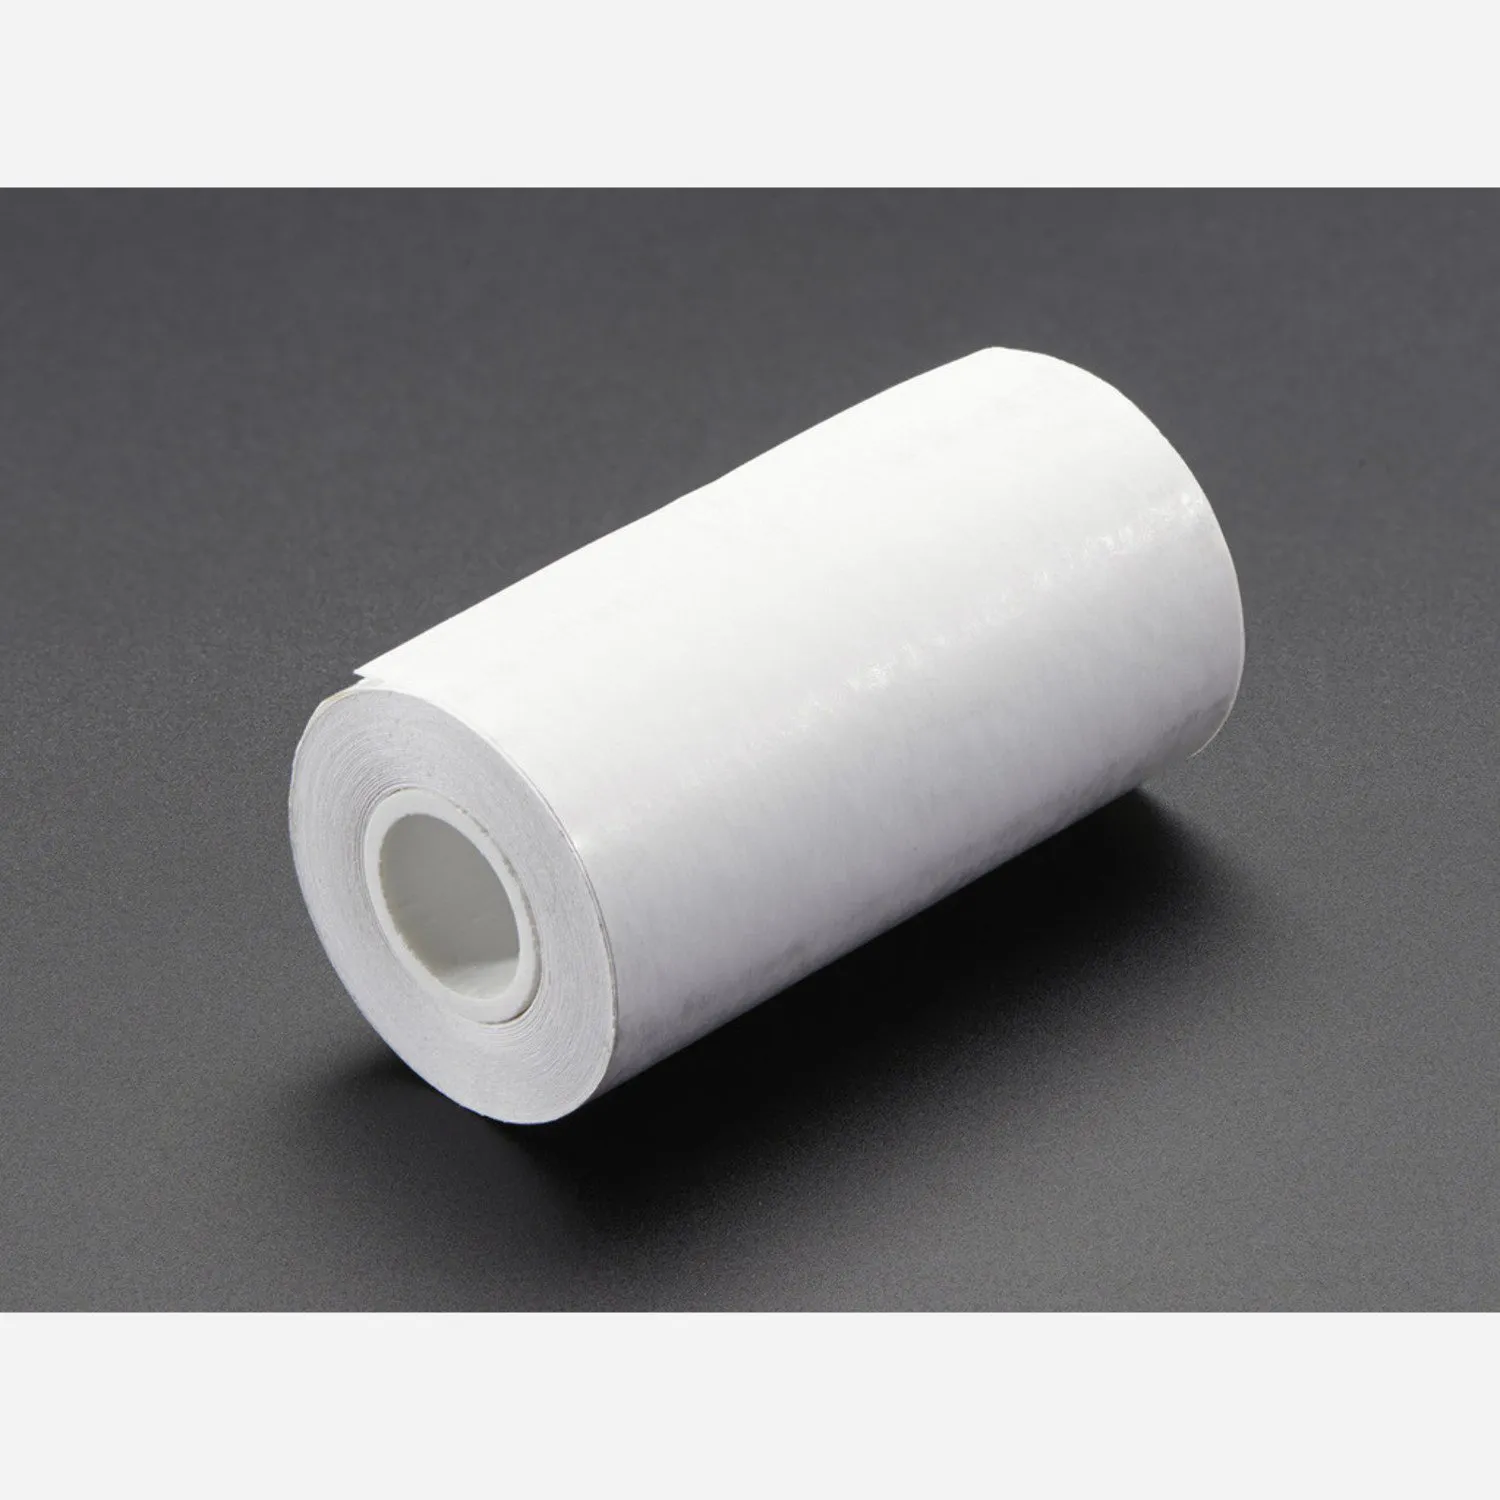 Photo of Thermal Paper Roll - 33' long, 2.25